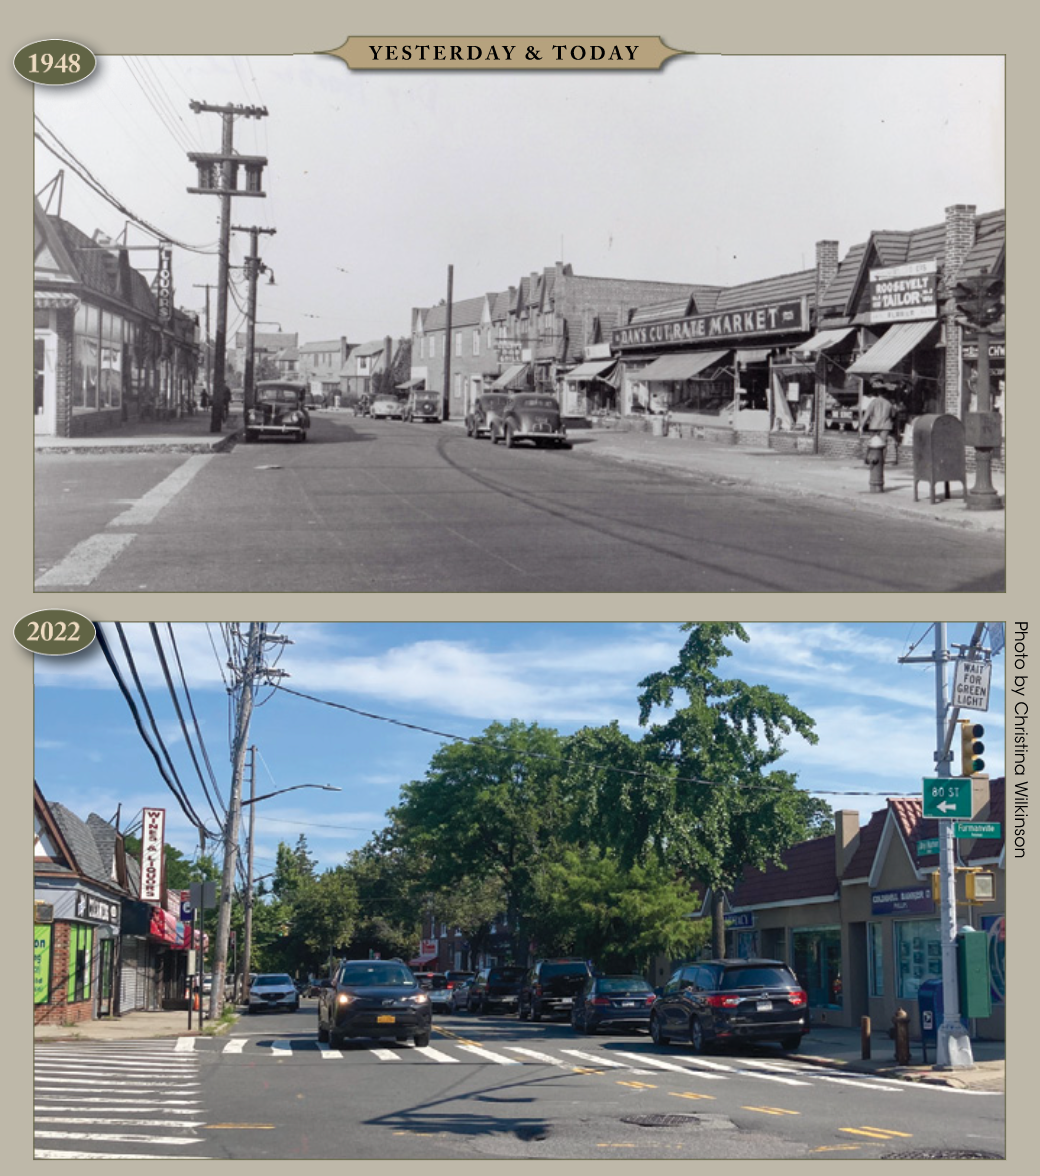 Yesterday & Today: Dry Harbor Road at 80th Street looking north